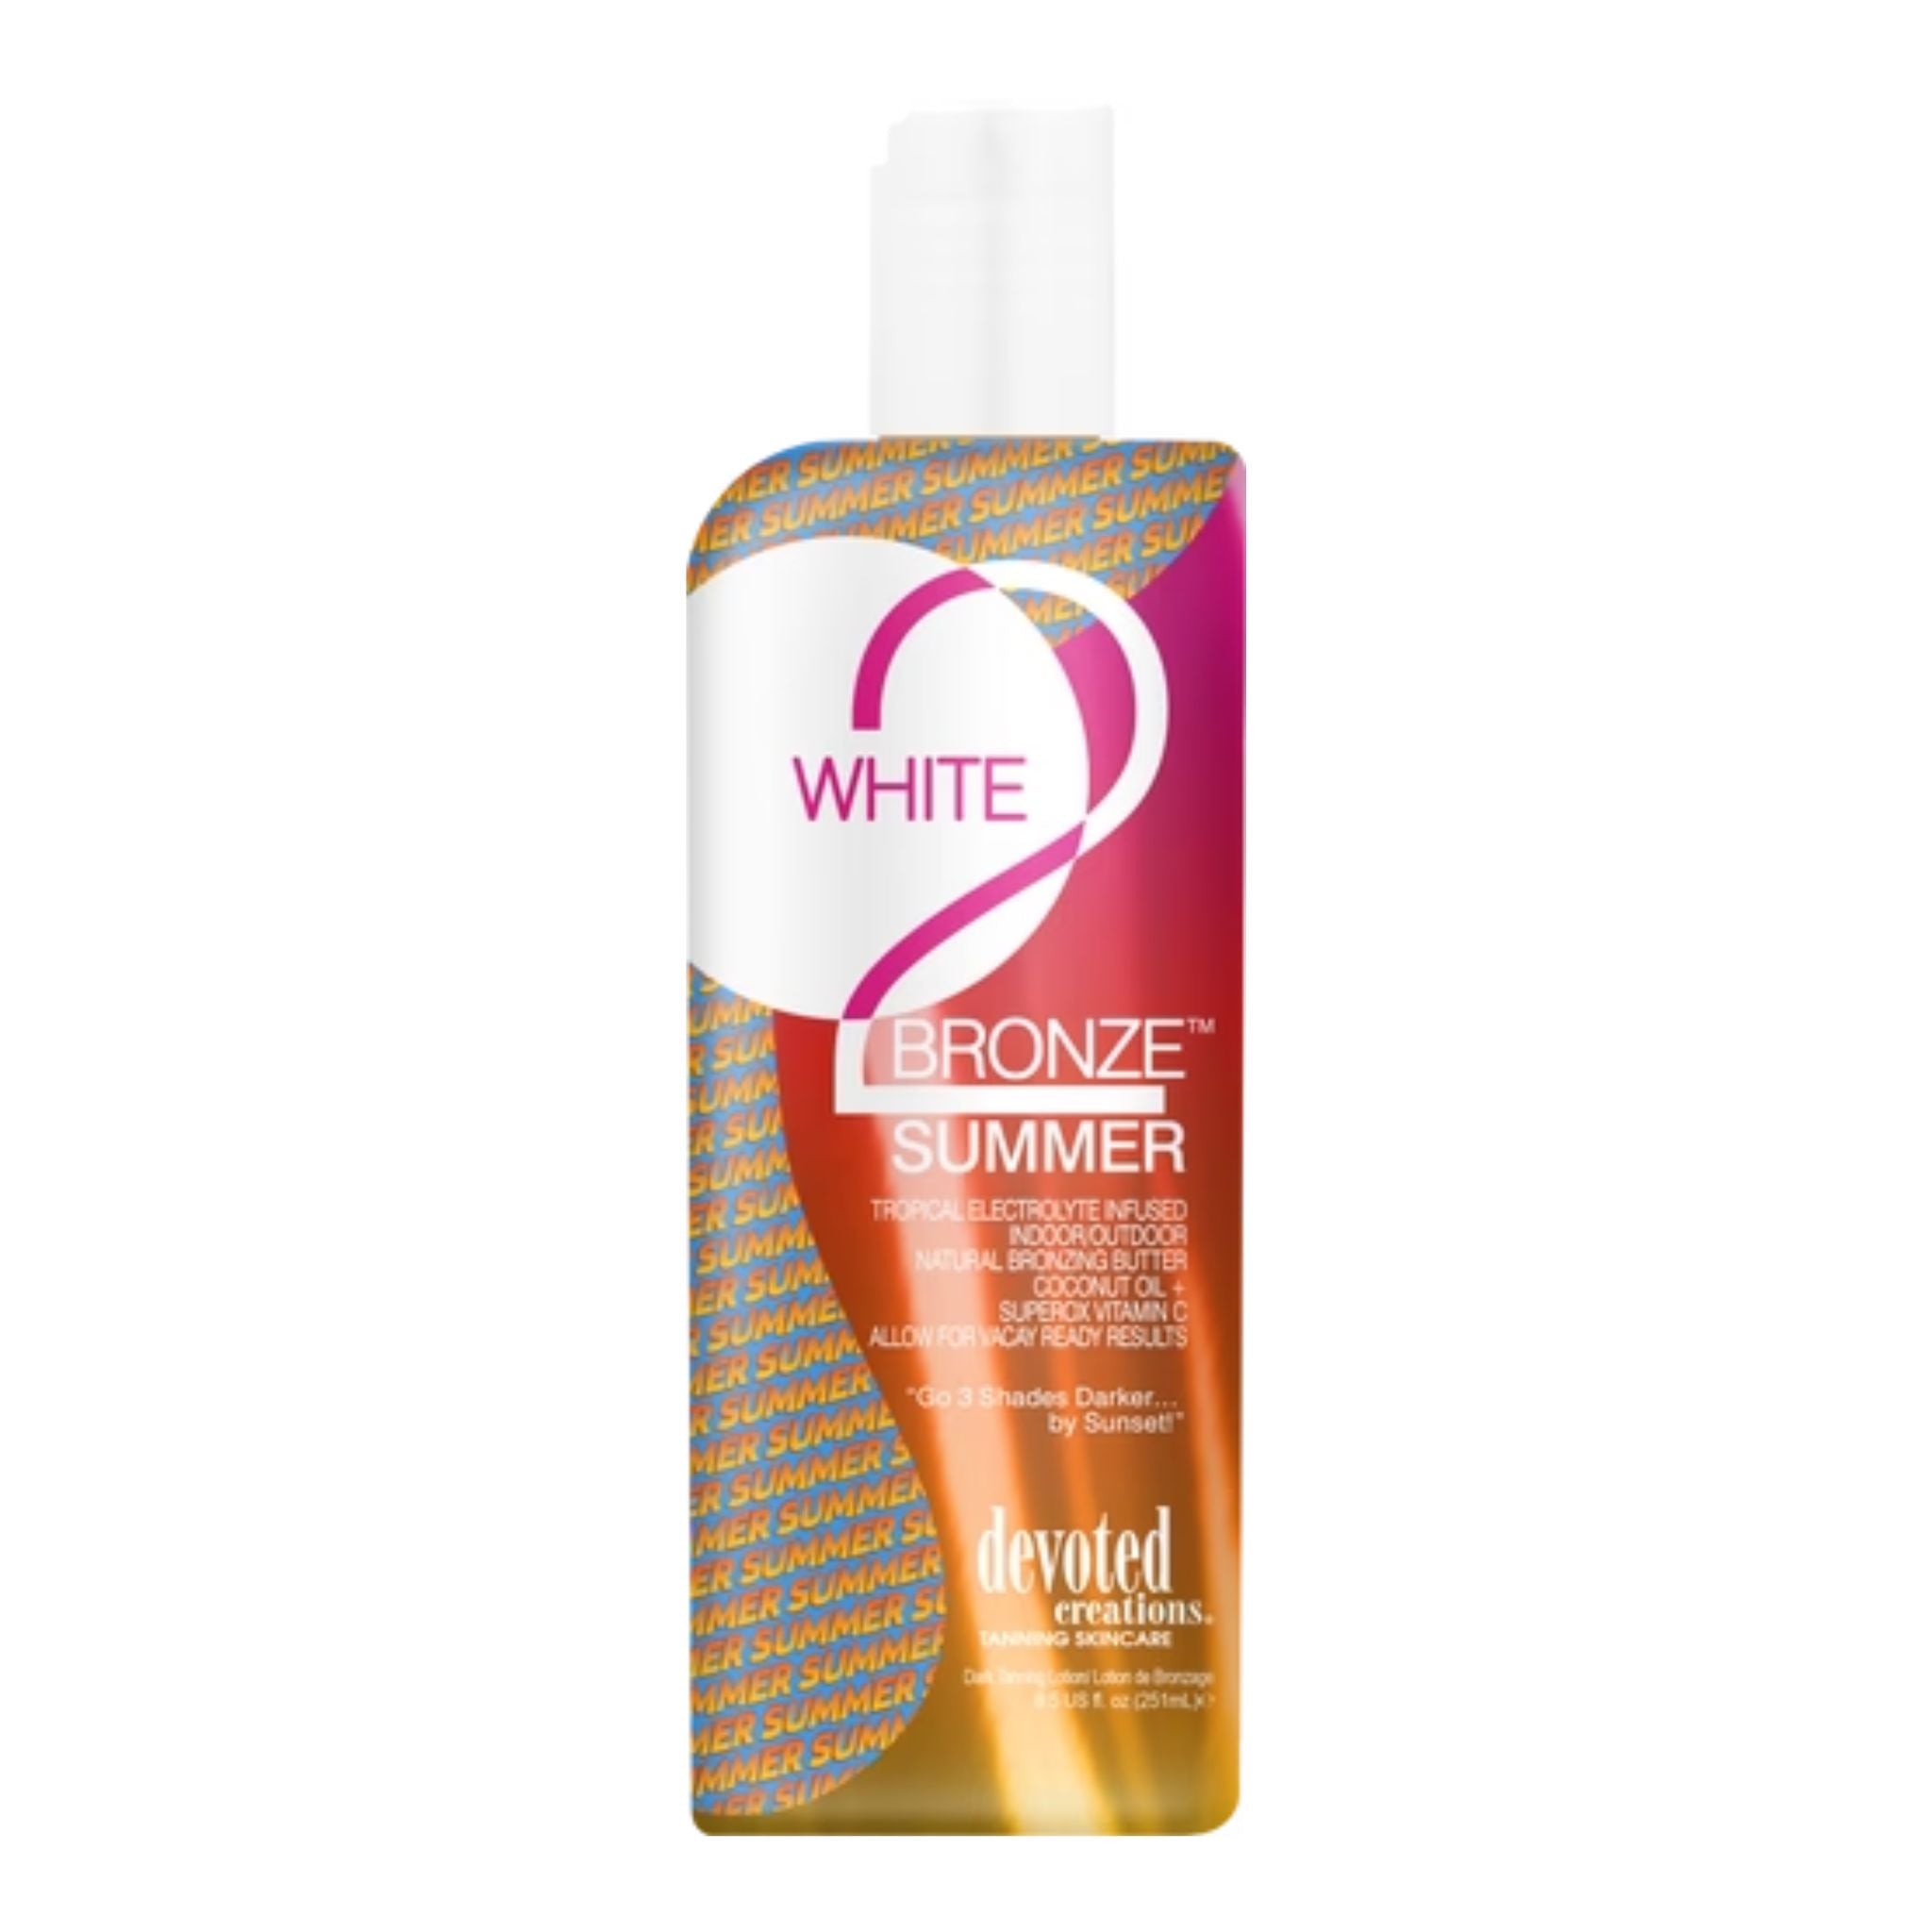 Devoted Creations White 2 Bronze Summer Tanning Lotion Tanning Lotion